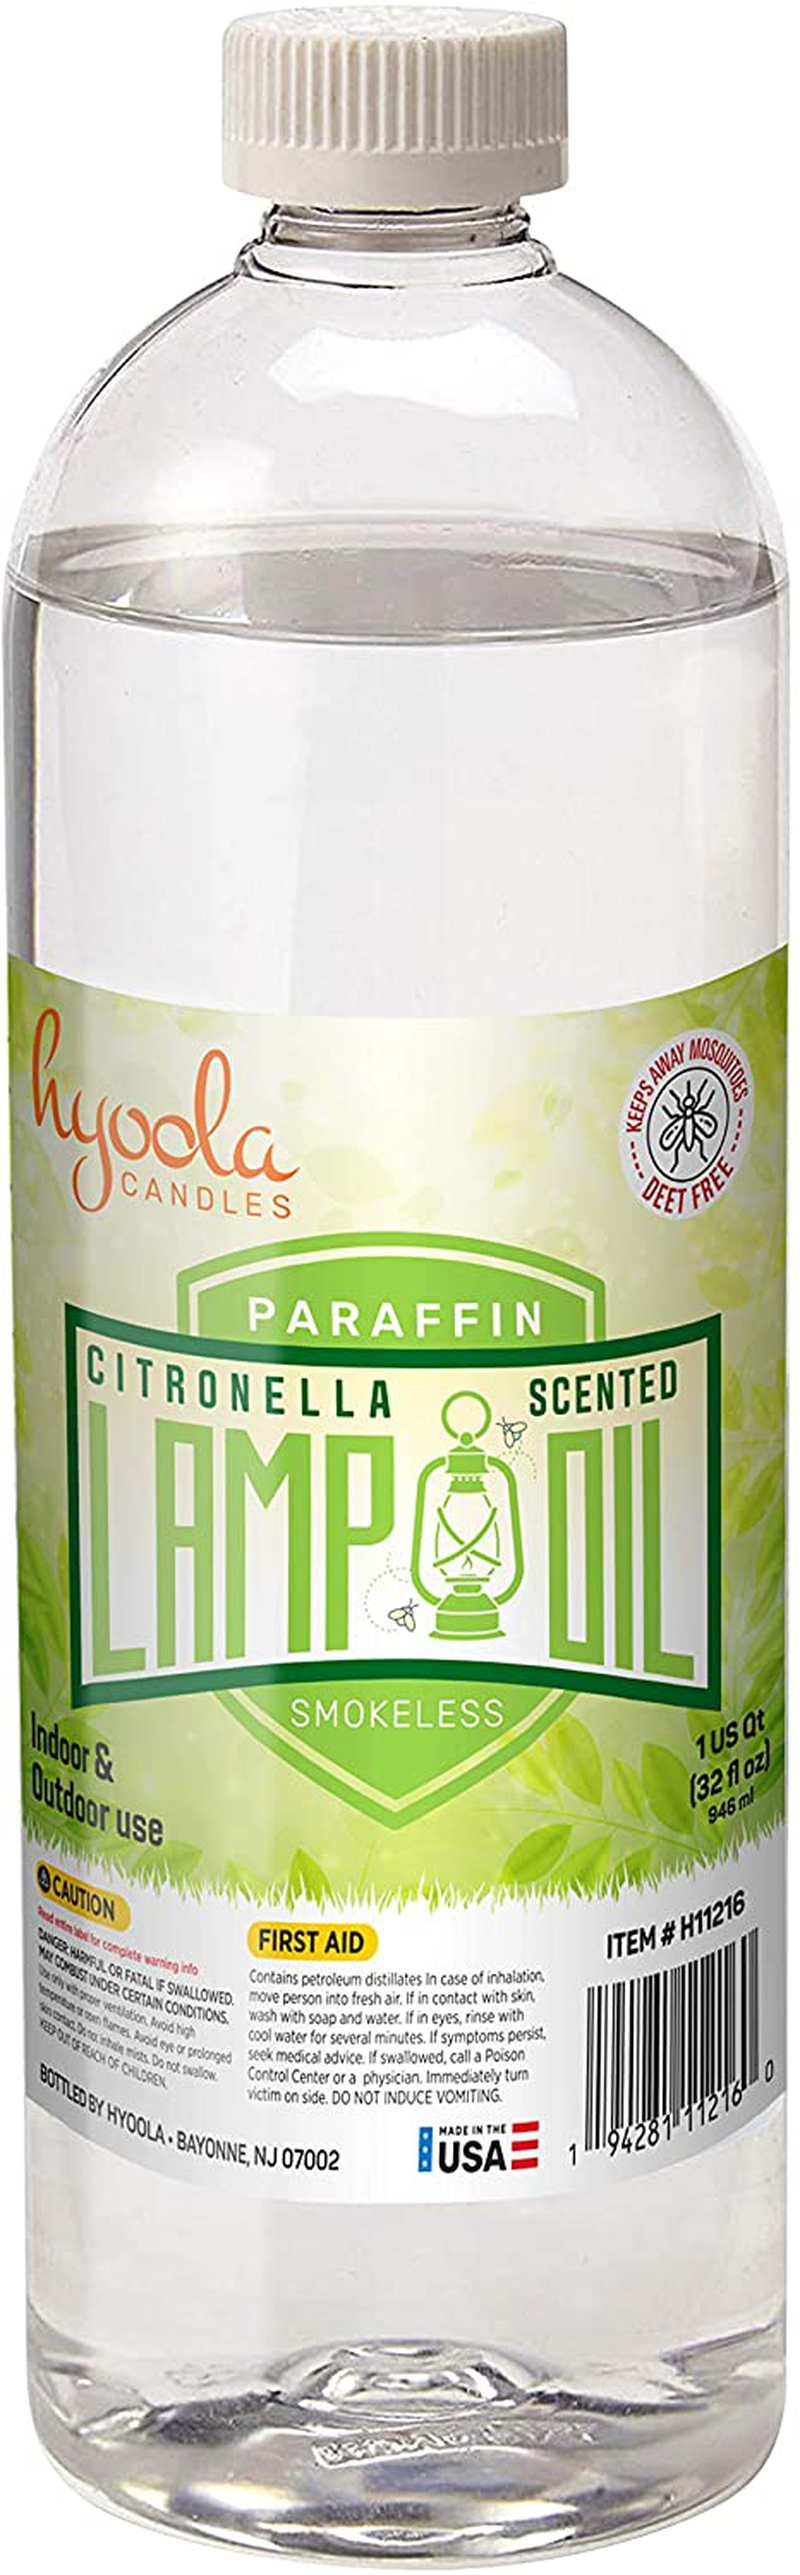 Citronella Lamp Oil, 1 Gallon - Smokeless Insect and Mosquito Repellent Scented Paraffin Fluid for Indoor and Outdoor Lamp, Lantern and Oil Candle Use - by Hyoola